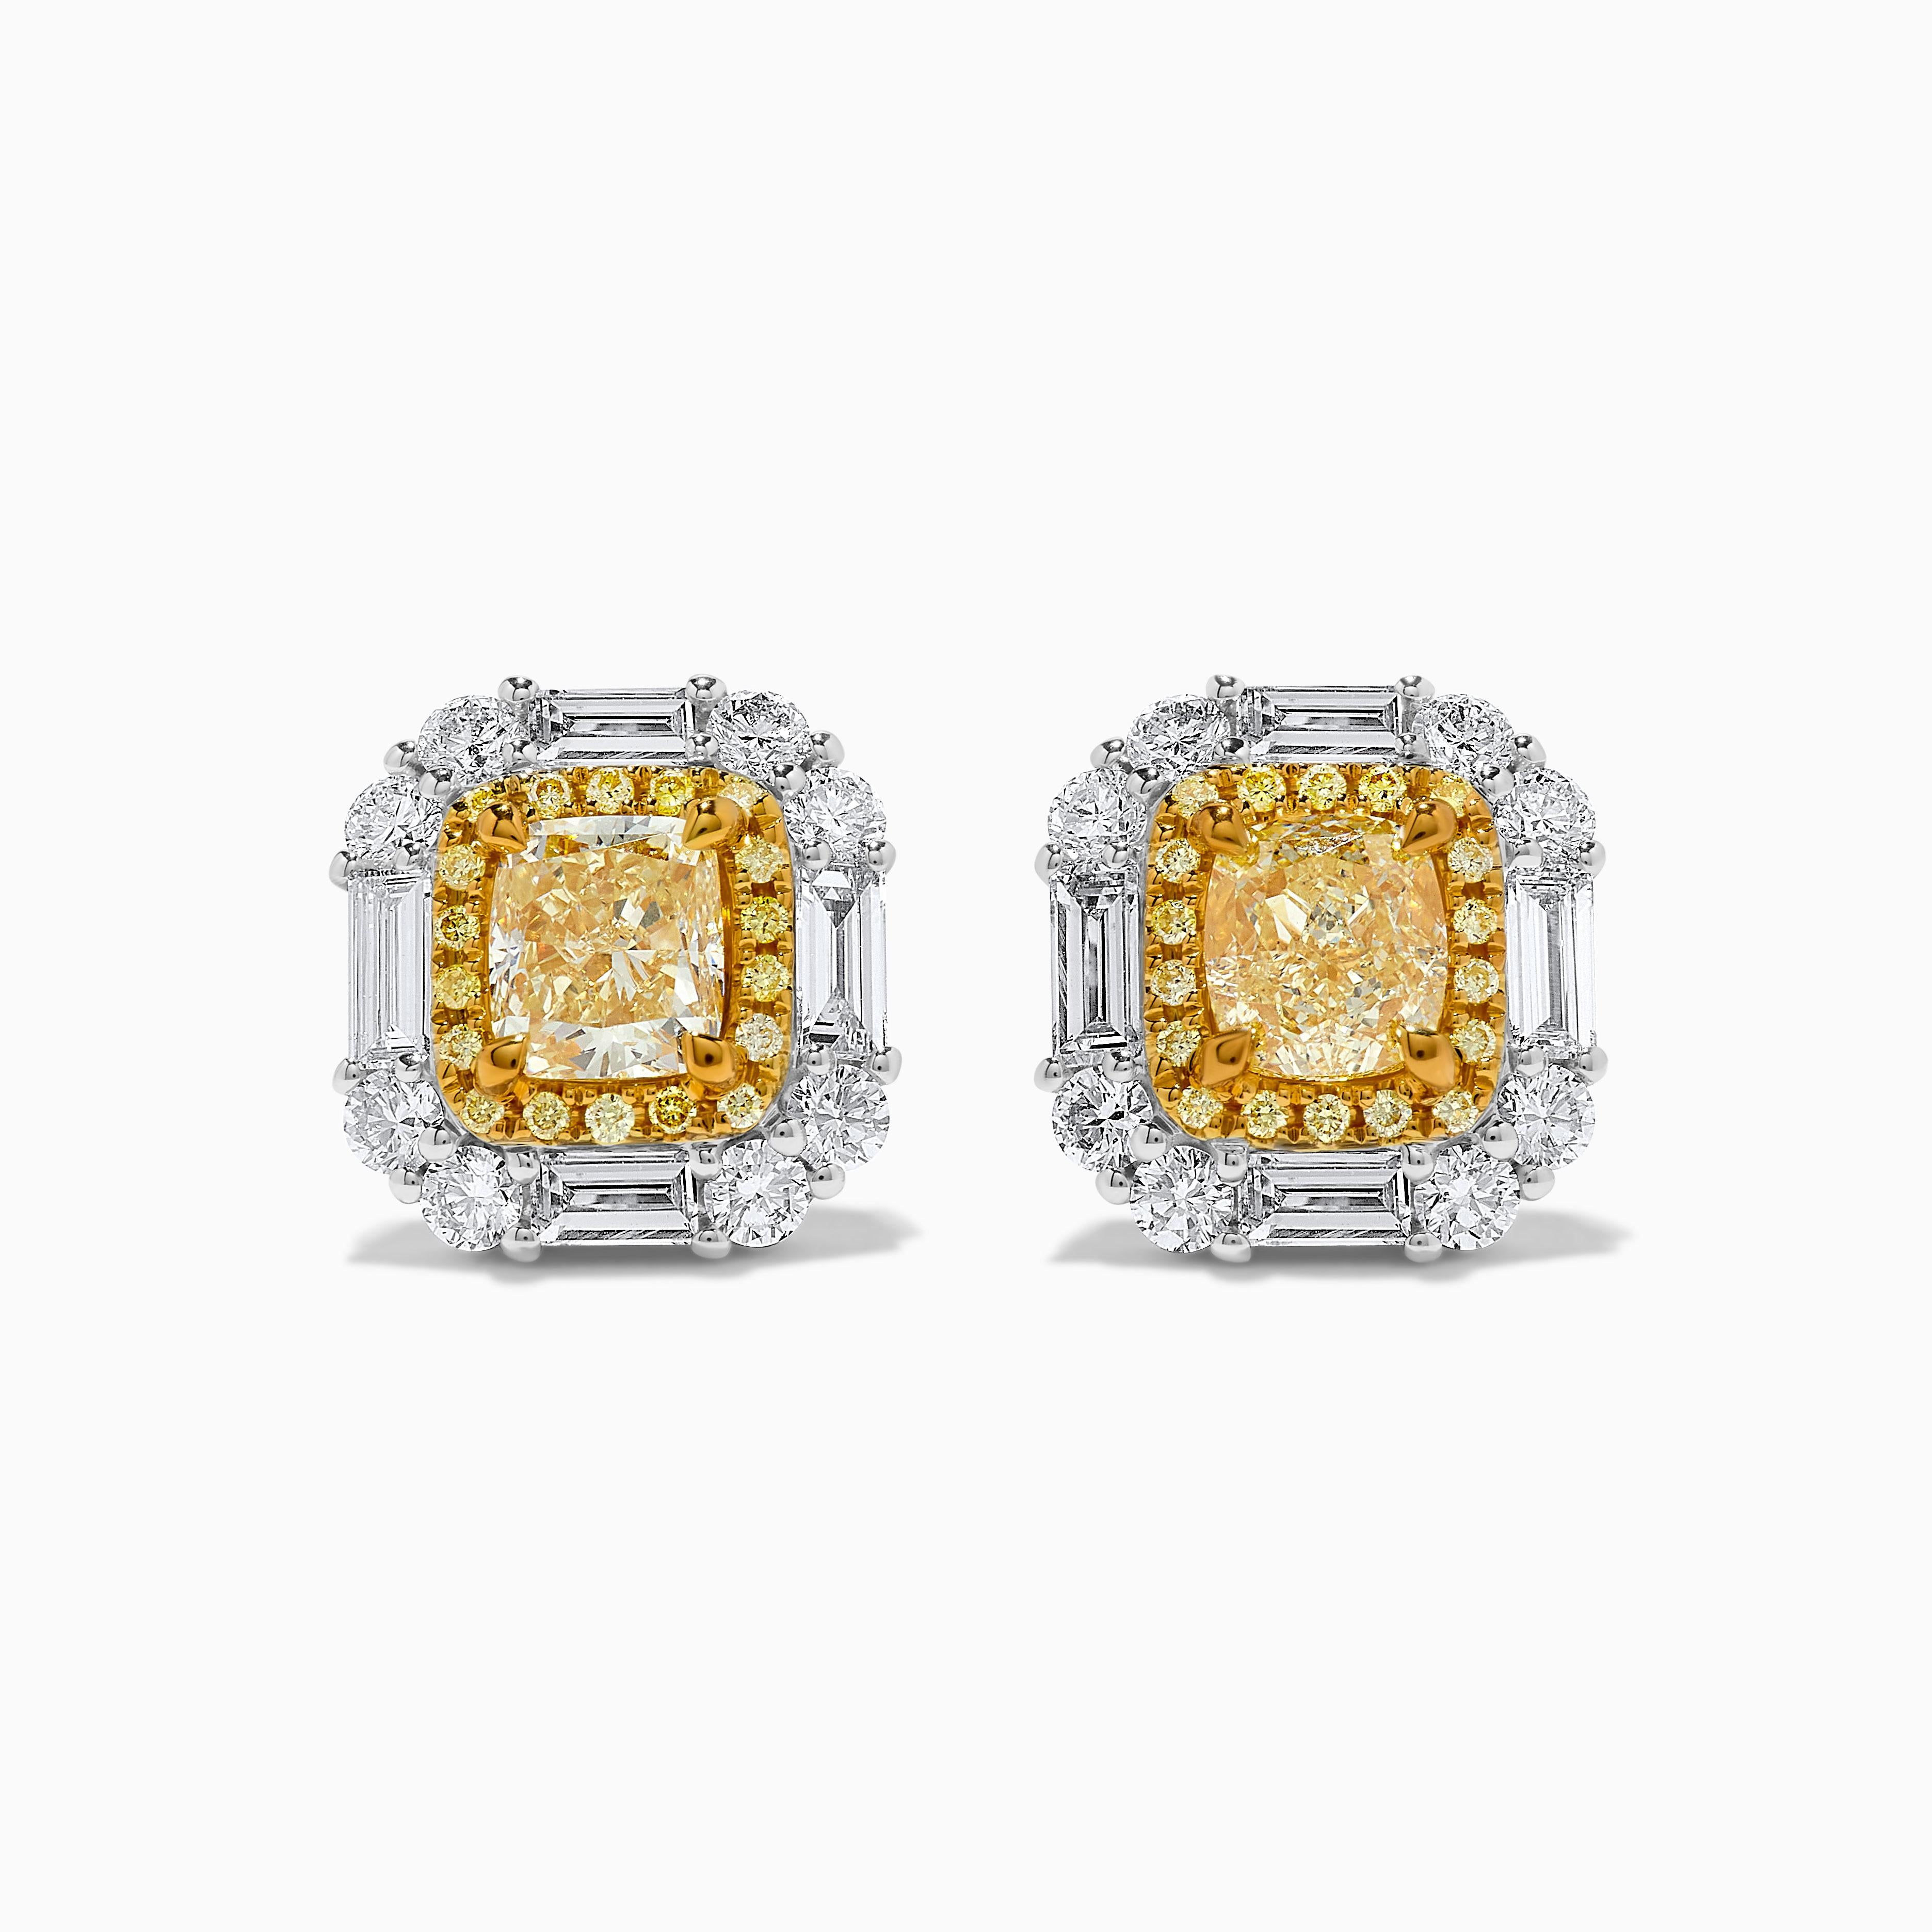 Natural Yellow Cushion Diamond 3.65 Carat TW Gold Stud Earrings In New Condition For Sale In New York, NY